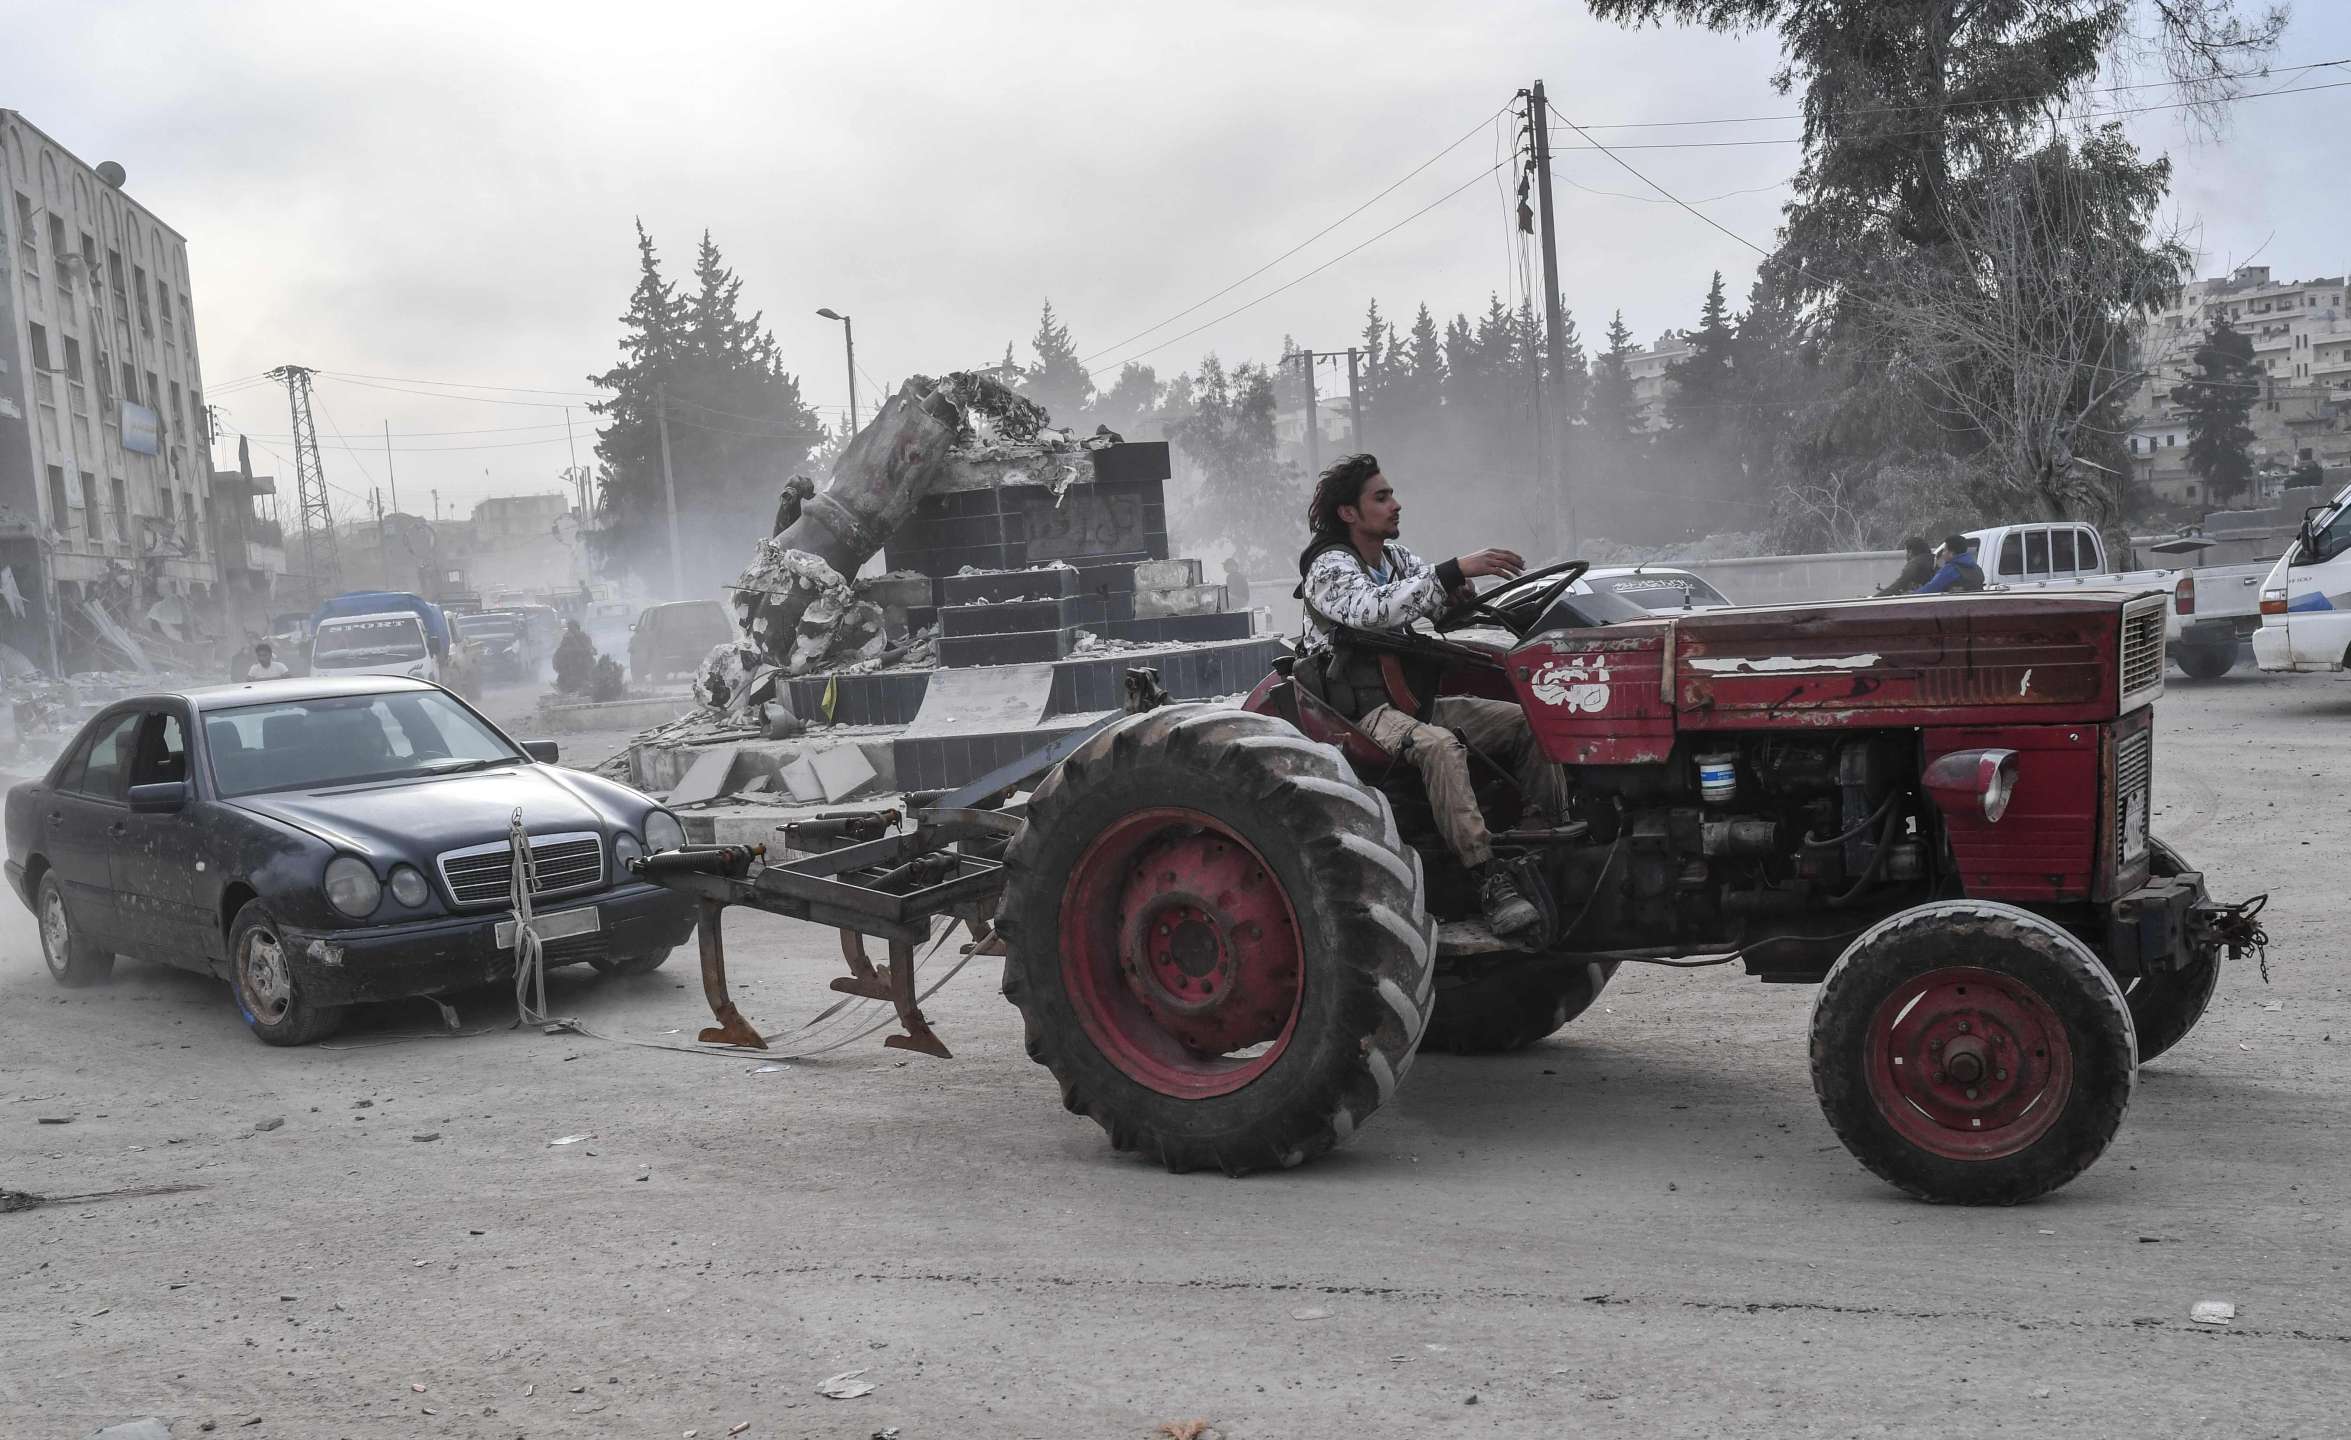 Free army fighters looting cars and furniture from Afrin (AFP)